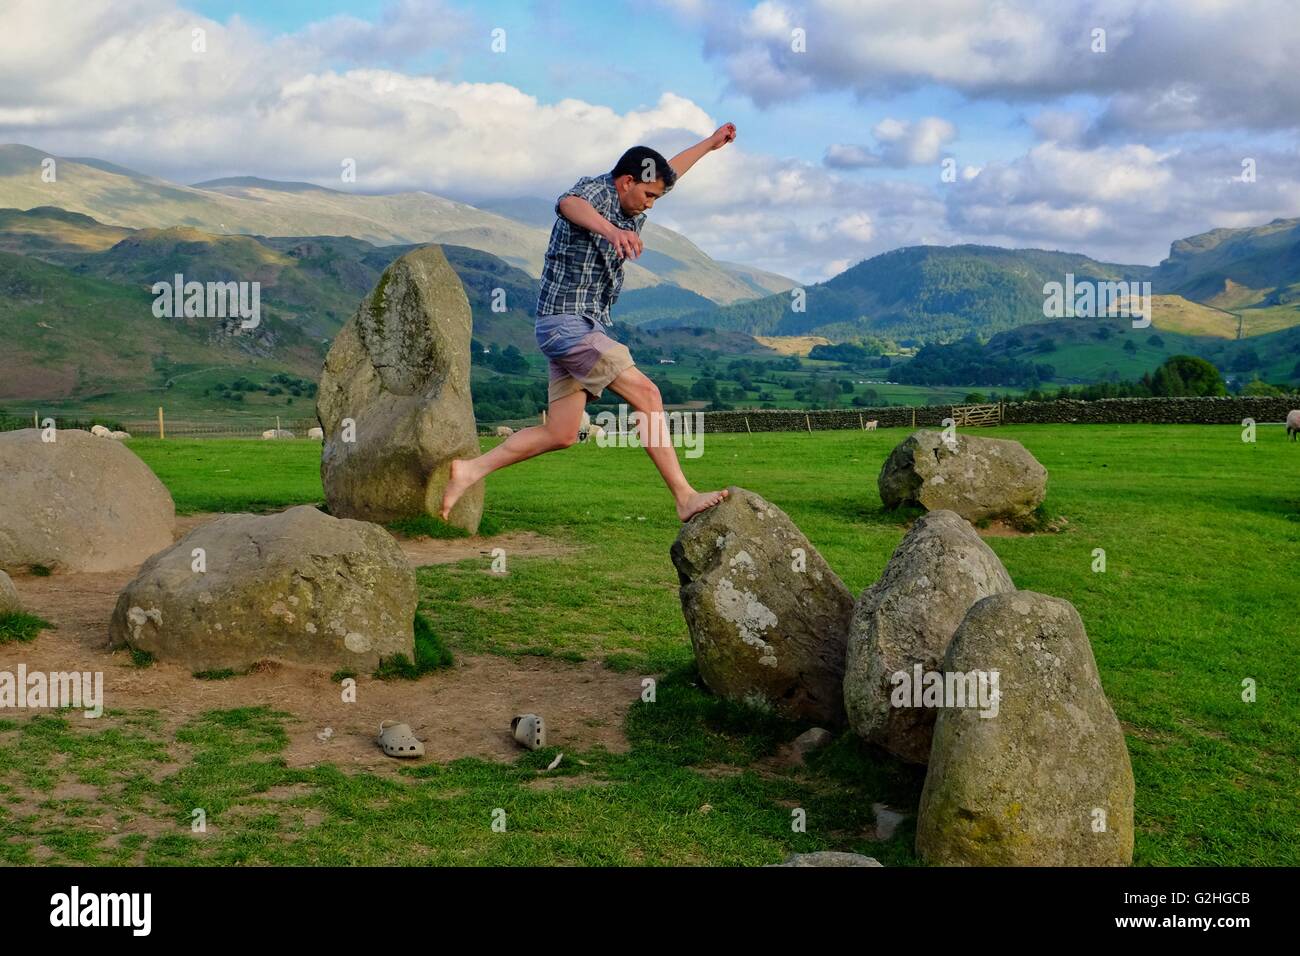 Castlerigg Stone Circle, Lake District, Cumbria, UK: 30 May 2016. A young man jumps across the stones in the late afternoon sun at Castlerigg Stone Circle after a day when crowds enjoyed a hot and suny Bank Holliday in the Lake District. Credit:  Tom Corban/Alamy Live News Stock Photo